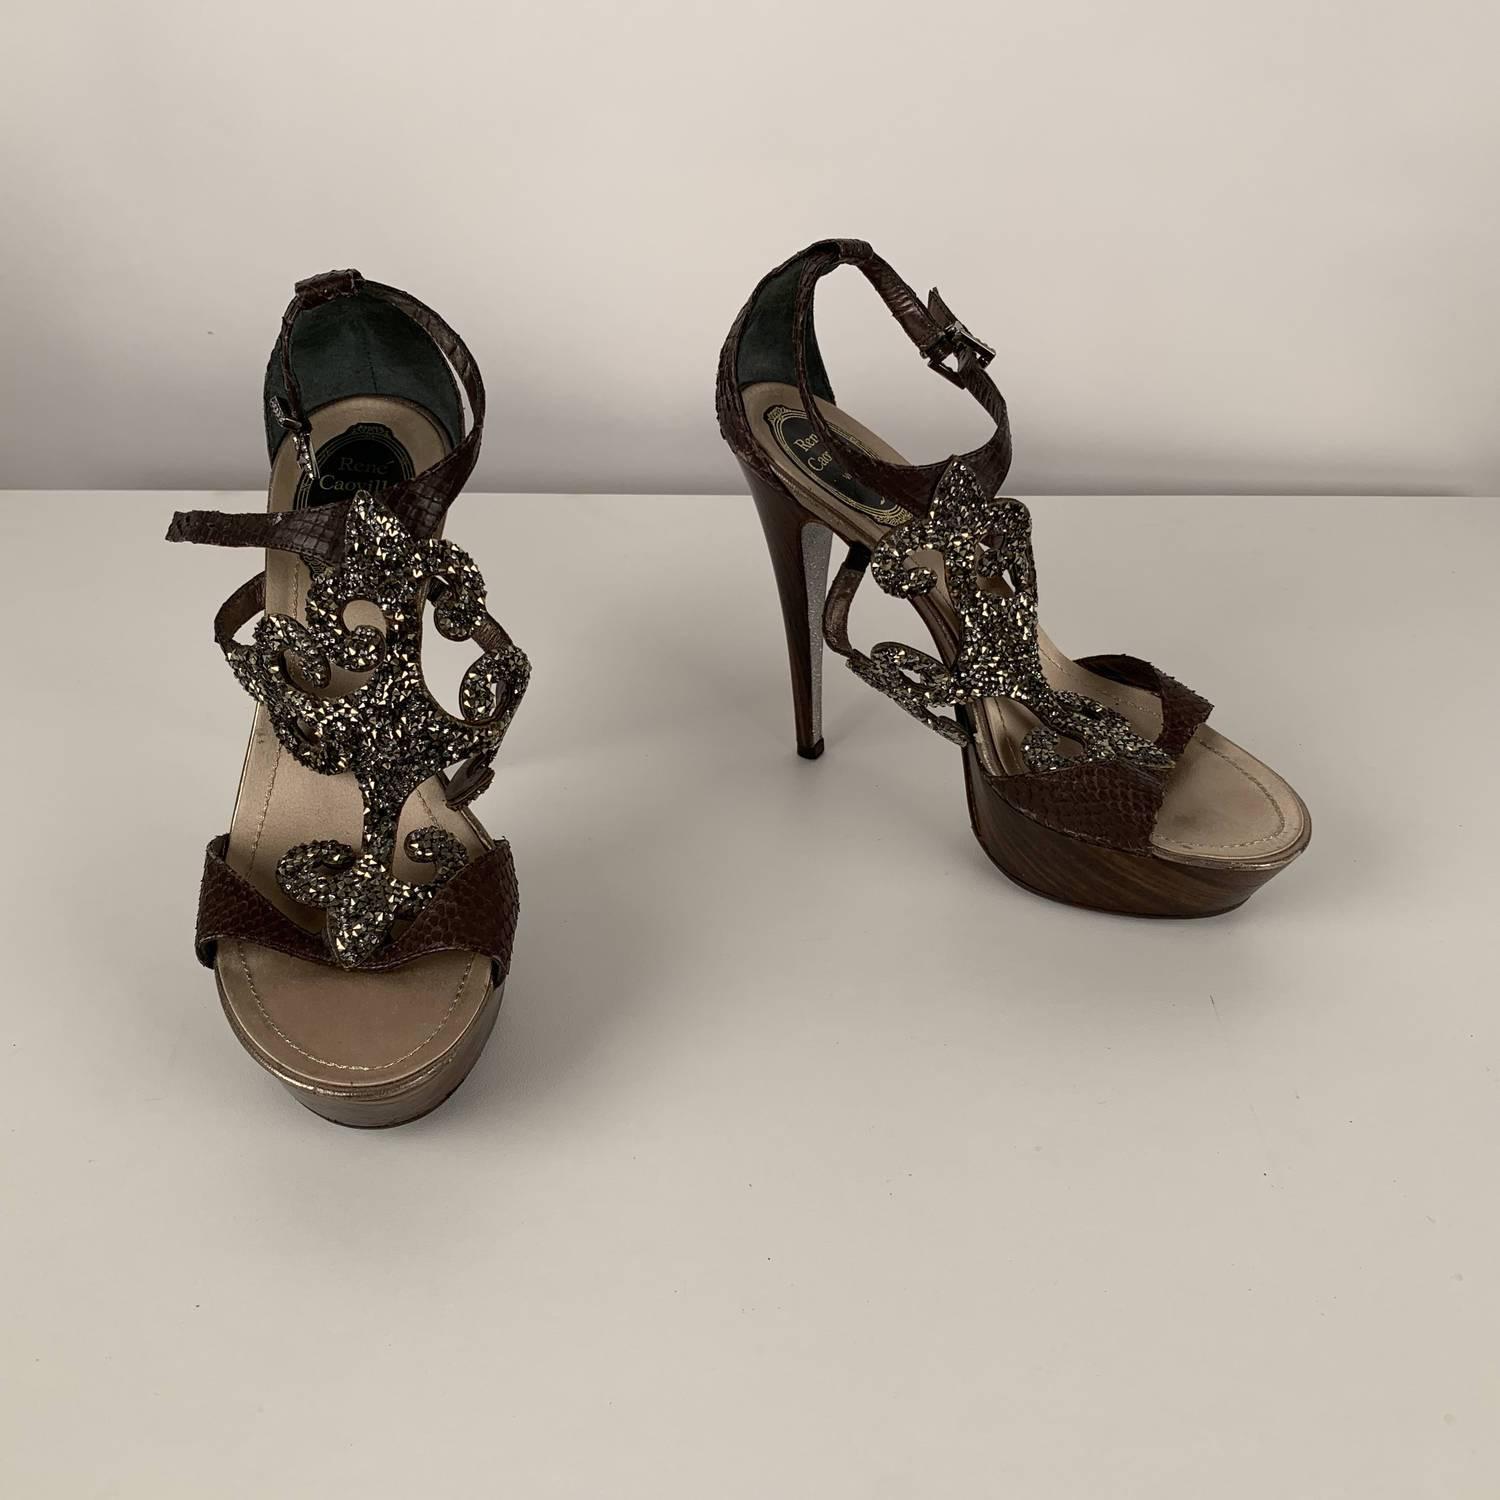 MATERIAL: Leather COLOR: Brown MODEL: Heeled Sandals GENDER: Women SIZE: 38 COUNTRY OF MANUFACTURE: Italy Condition CONDITION DETAILS: B :GOOD CONDITION - Some light wear of use - some rhinestones are missing, some wear of use on leather (on the